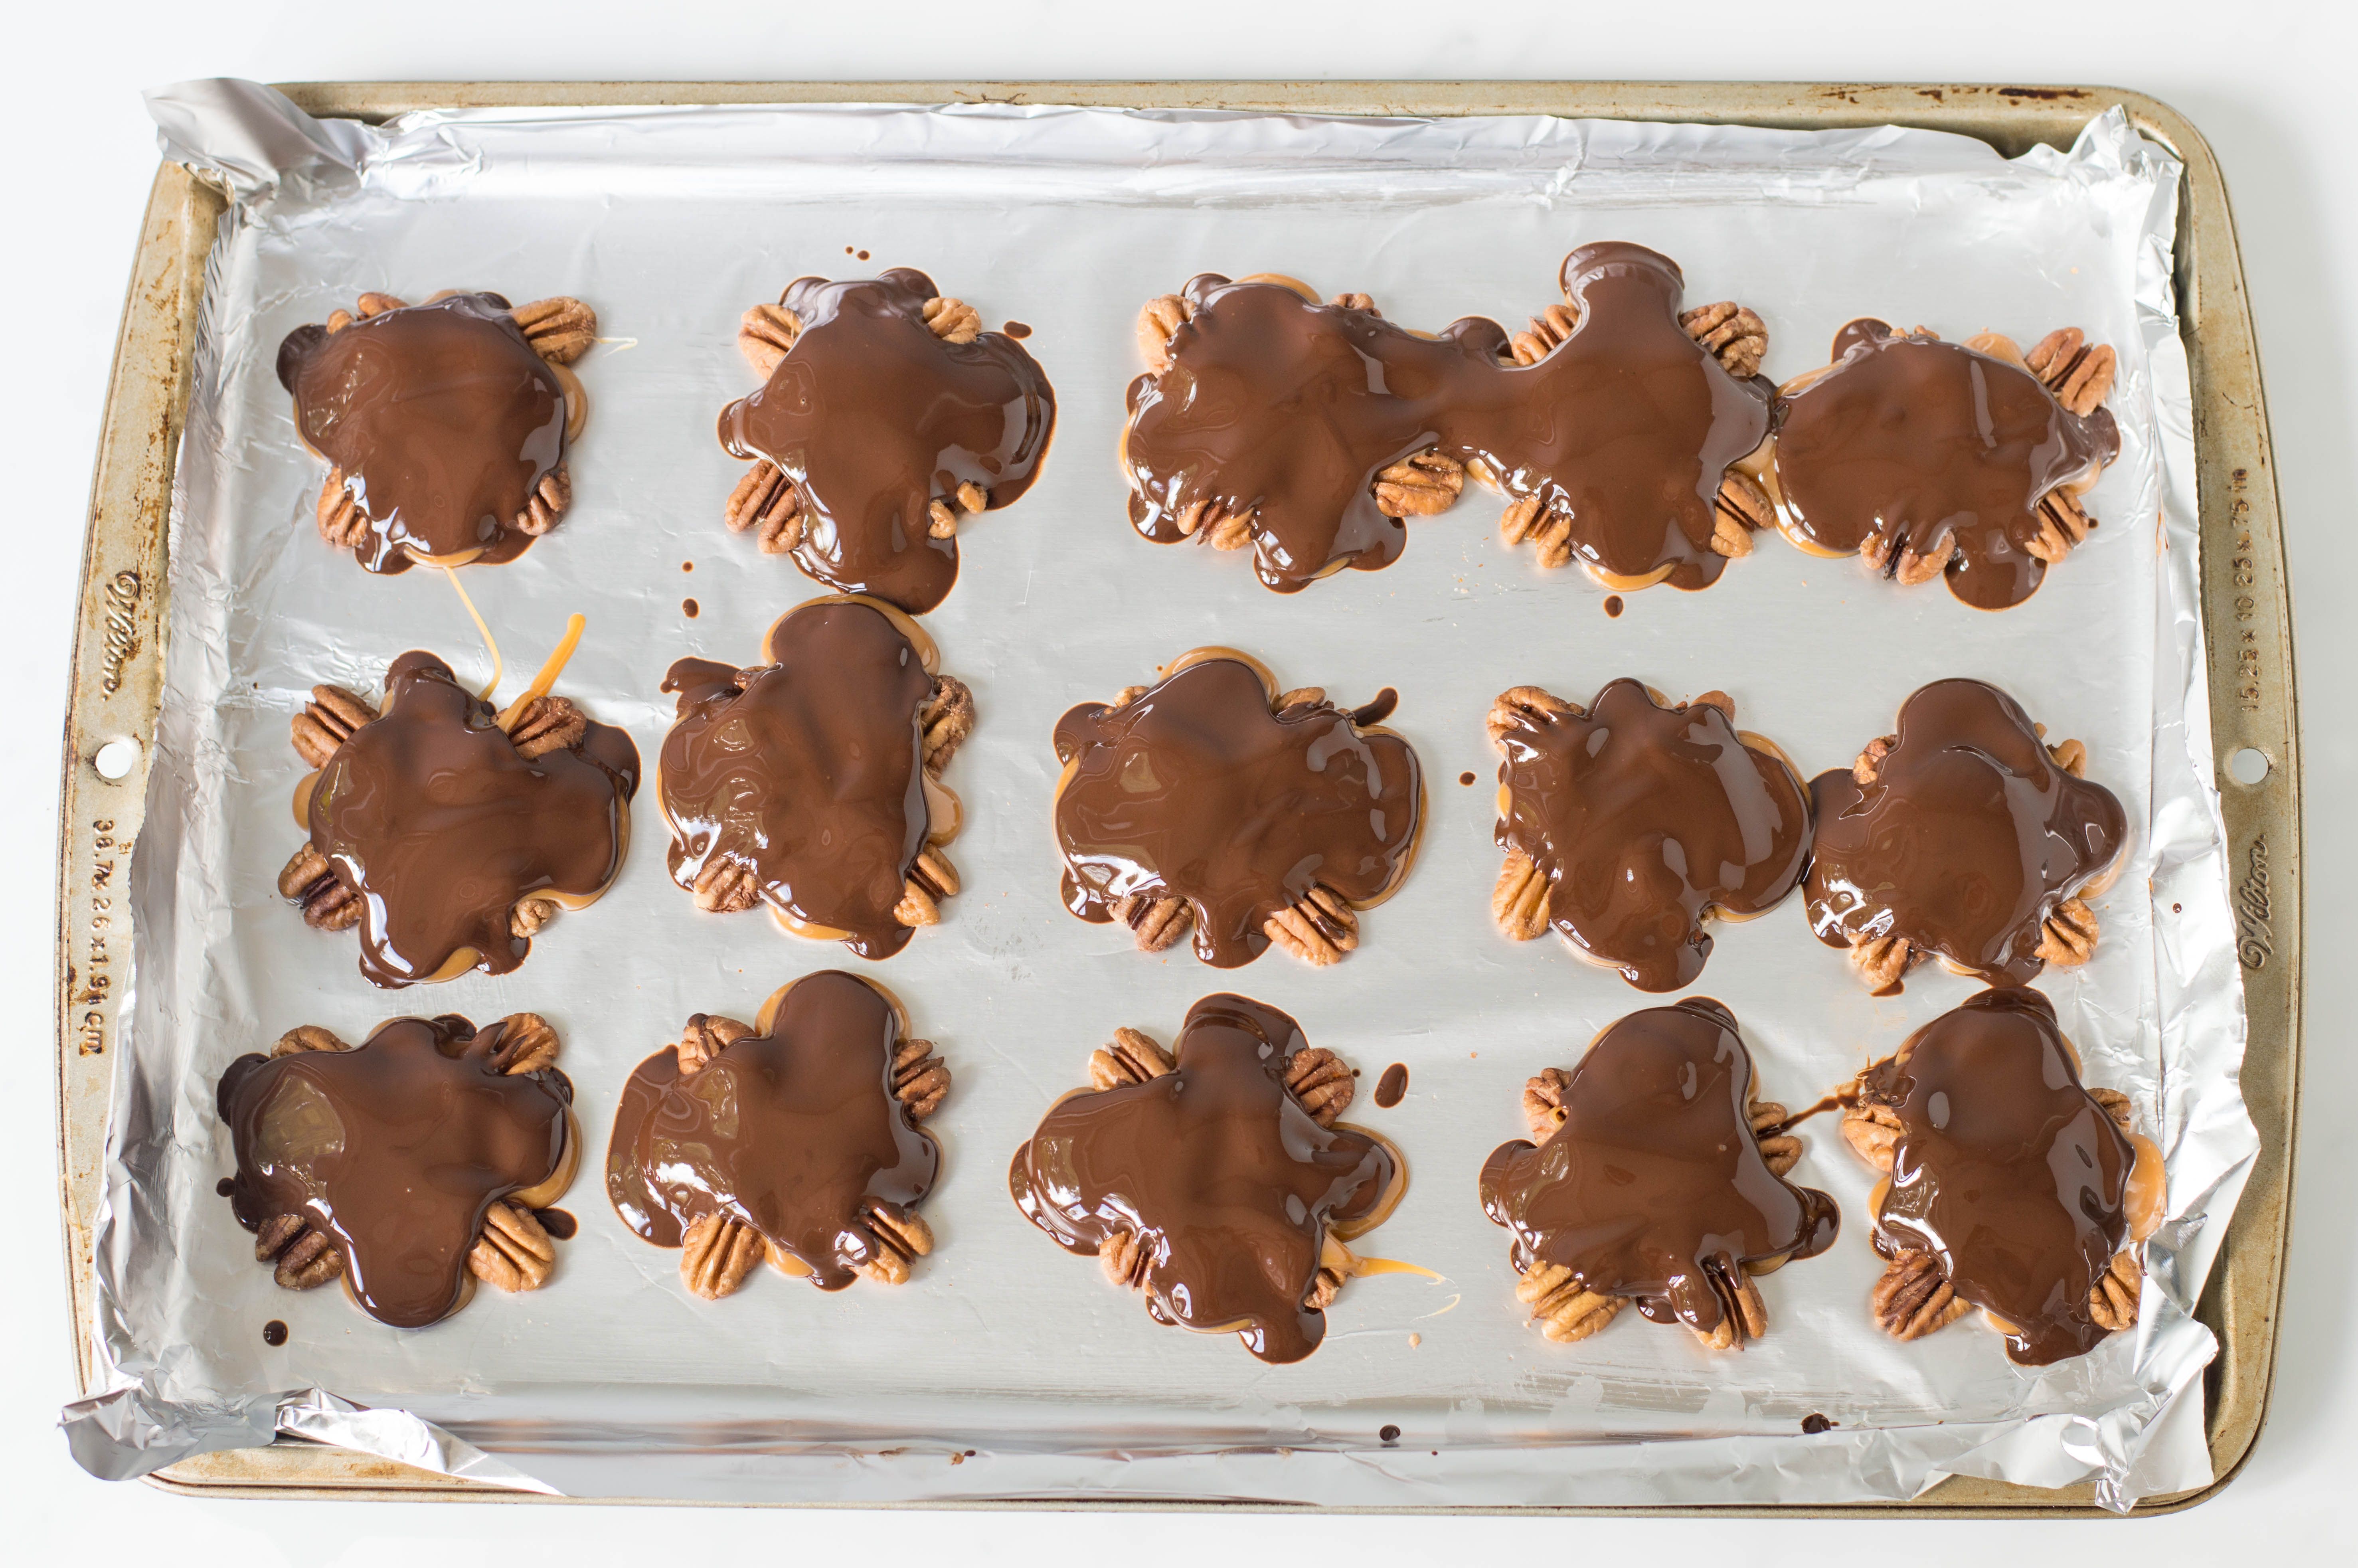 Homemade Turtle Candy With Pecans And Caramel